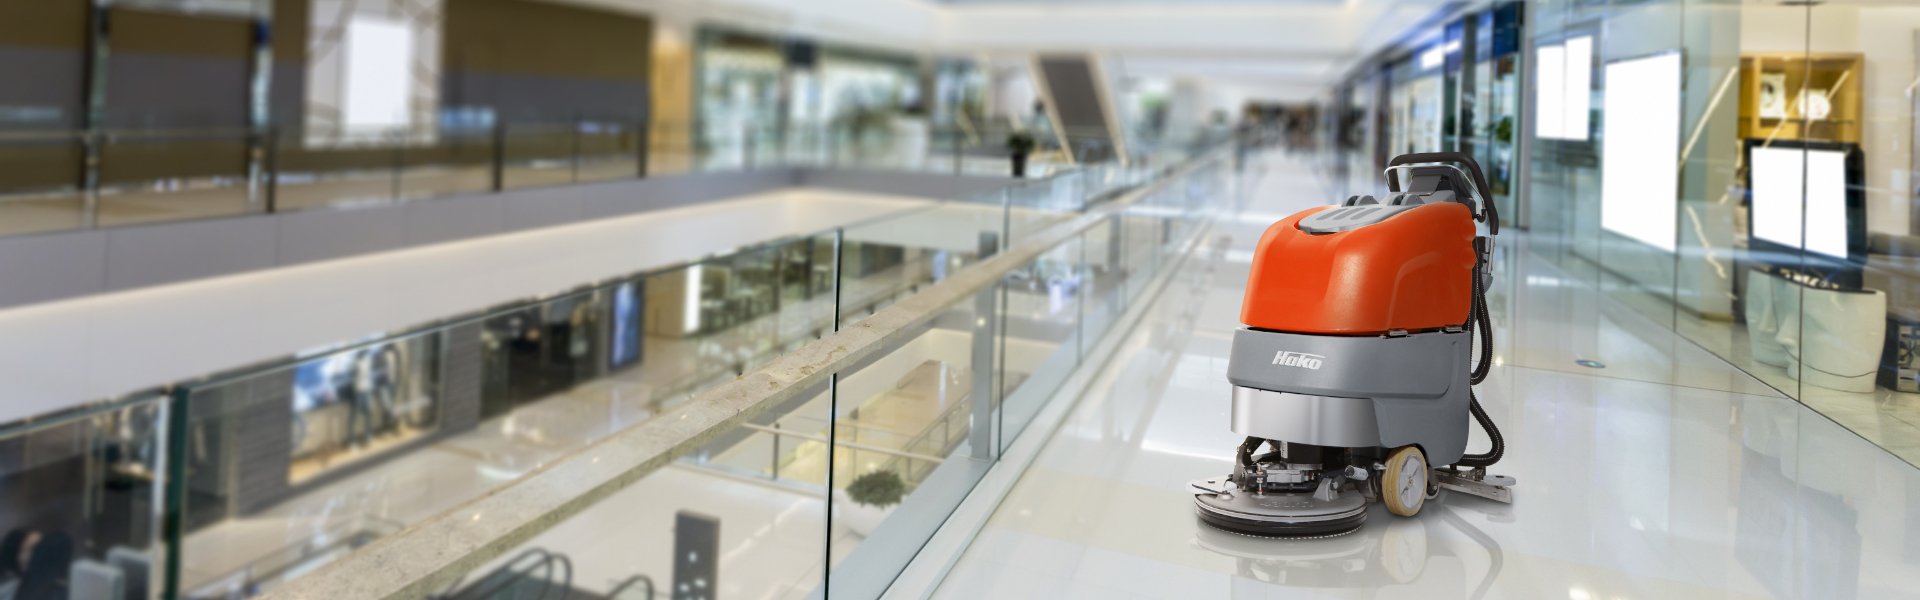 Spotless Floors: A Beginner's Guide to Using Automatic Floor Scrubbers